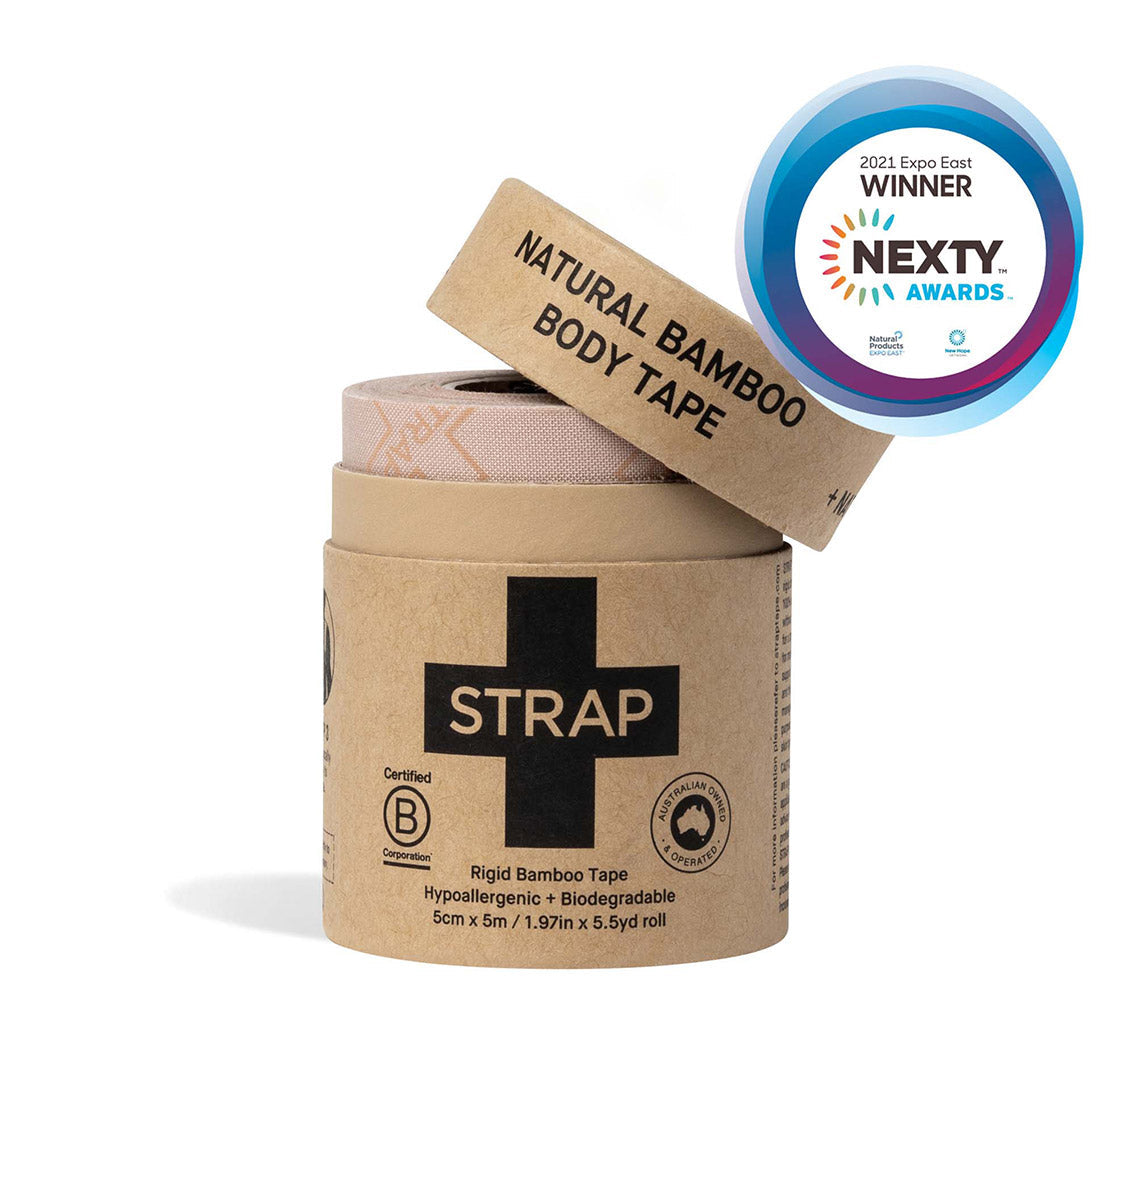 Strap Natural Bamboo Body Tape Sports Tape Rigid Hypoallergenic Tape, Biodegradable